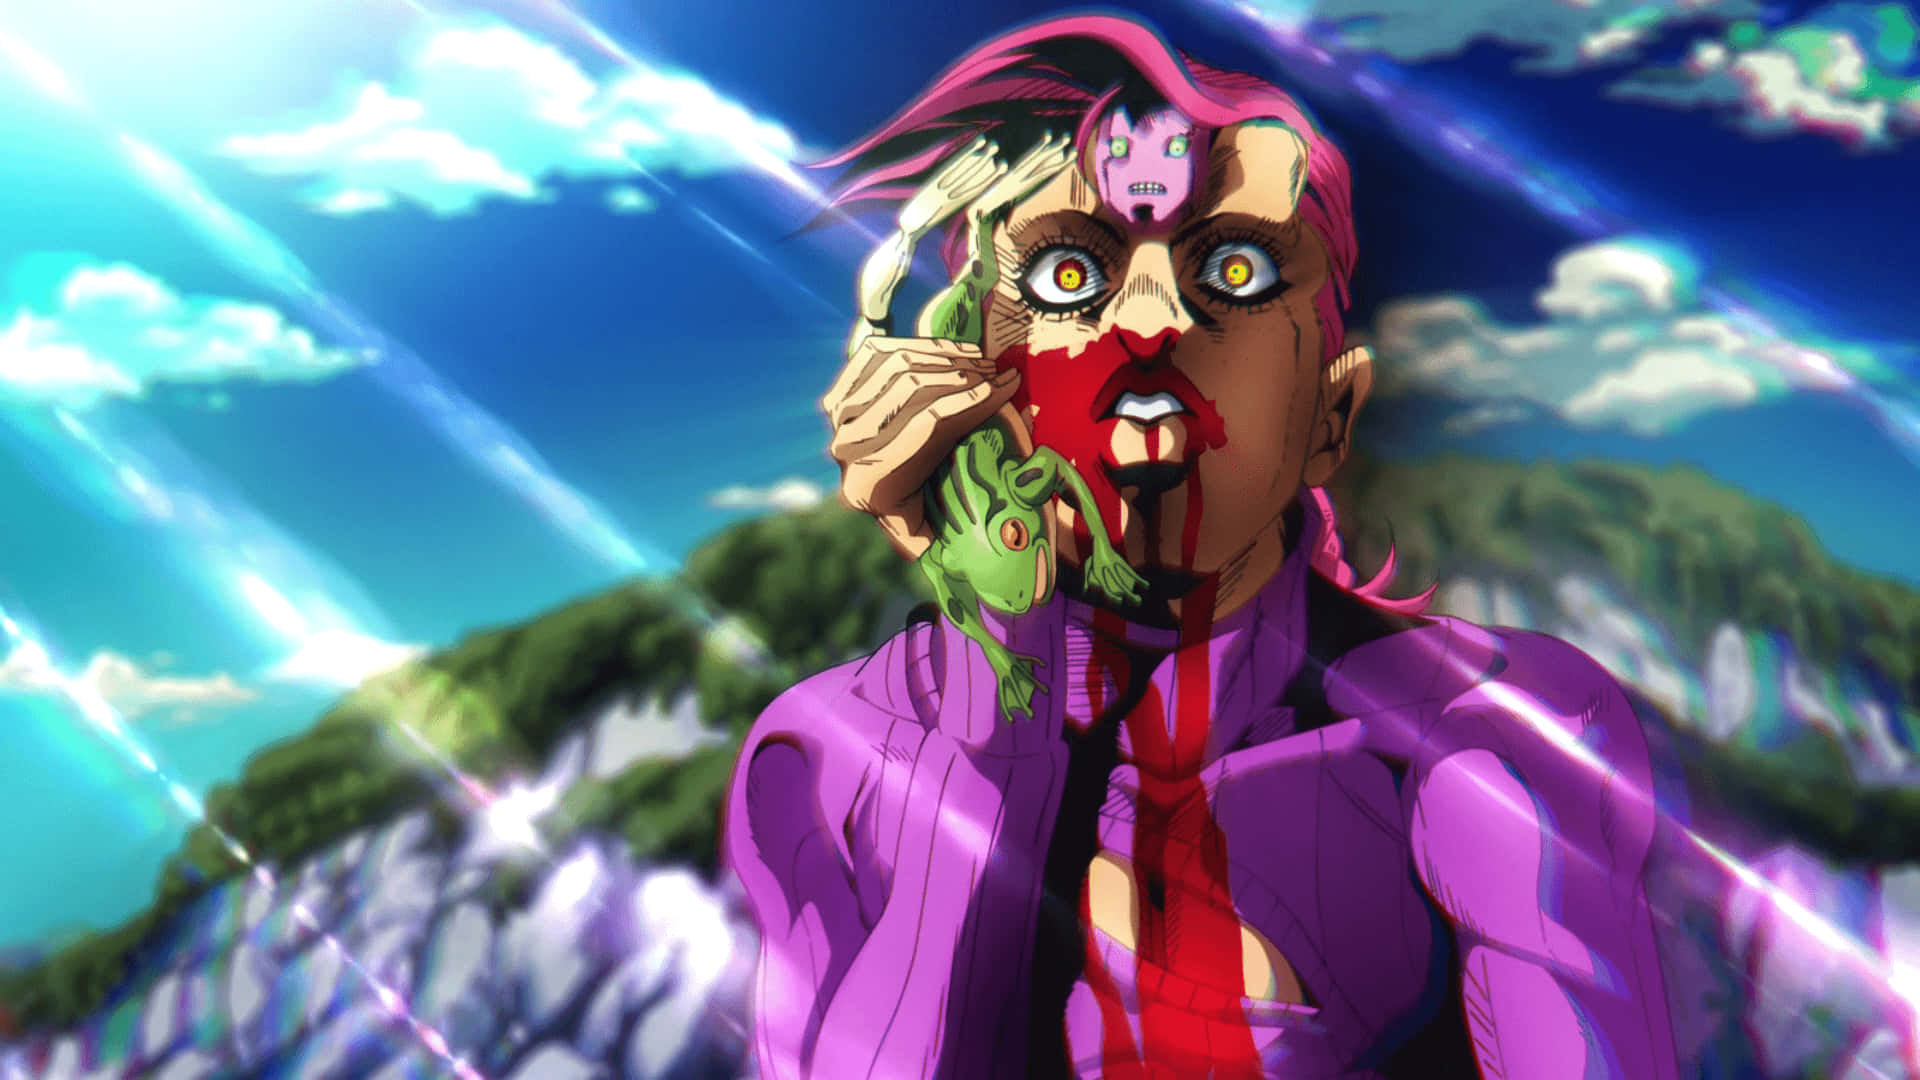 Vento Aureo anime characters in action Wallpaper